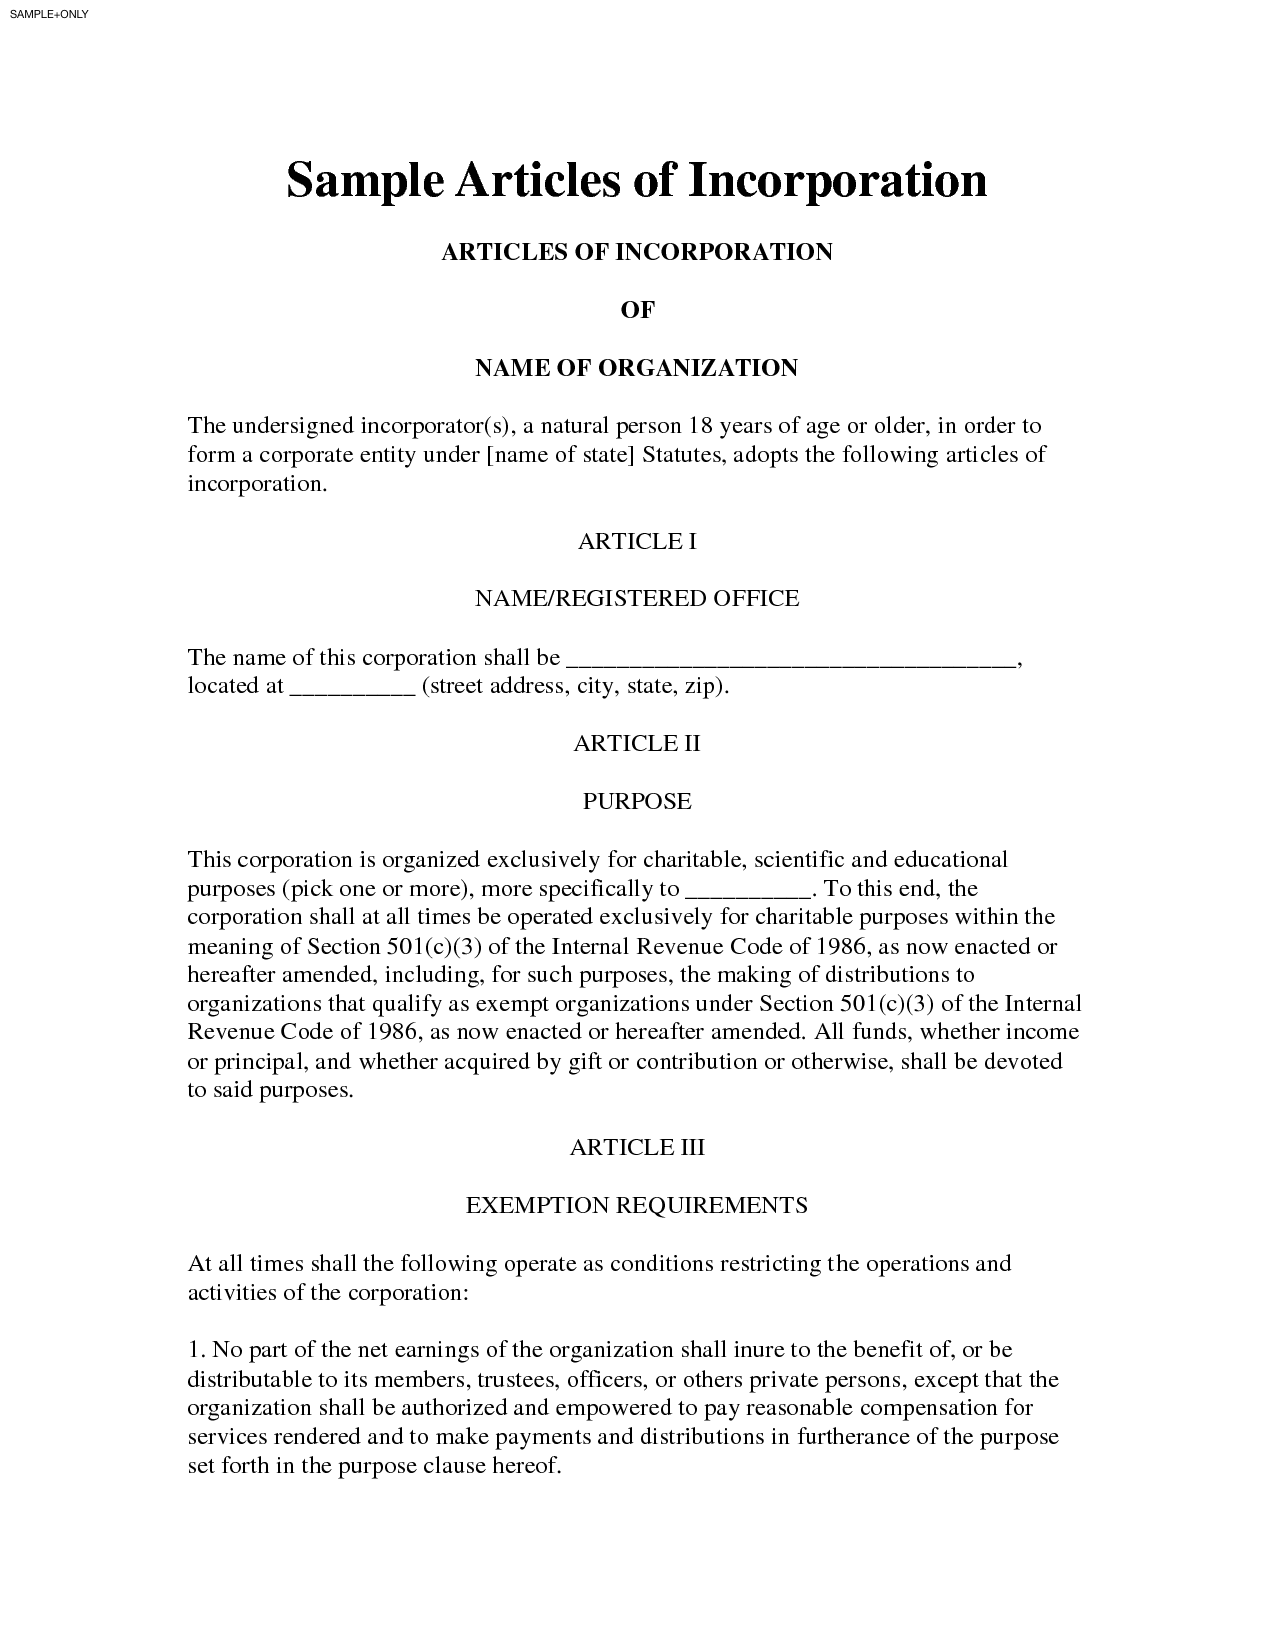 Articles of Incorporation Worksheet   Articles of Incorporation 